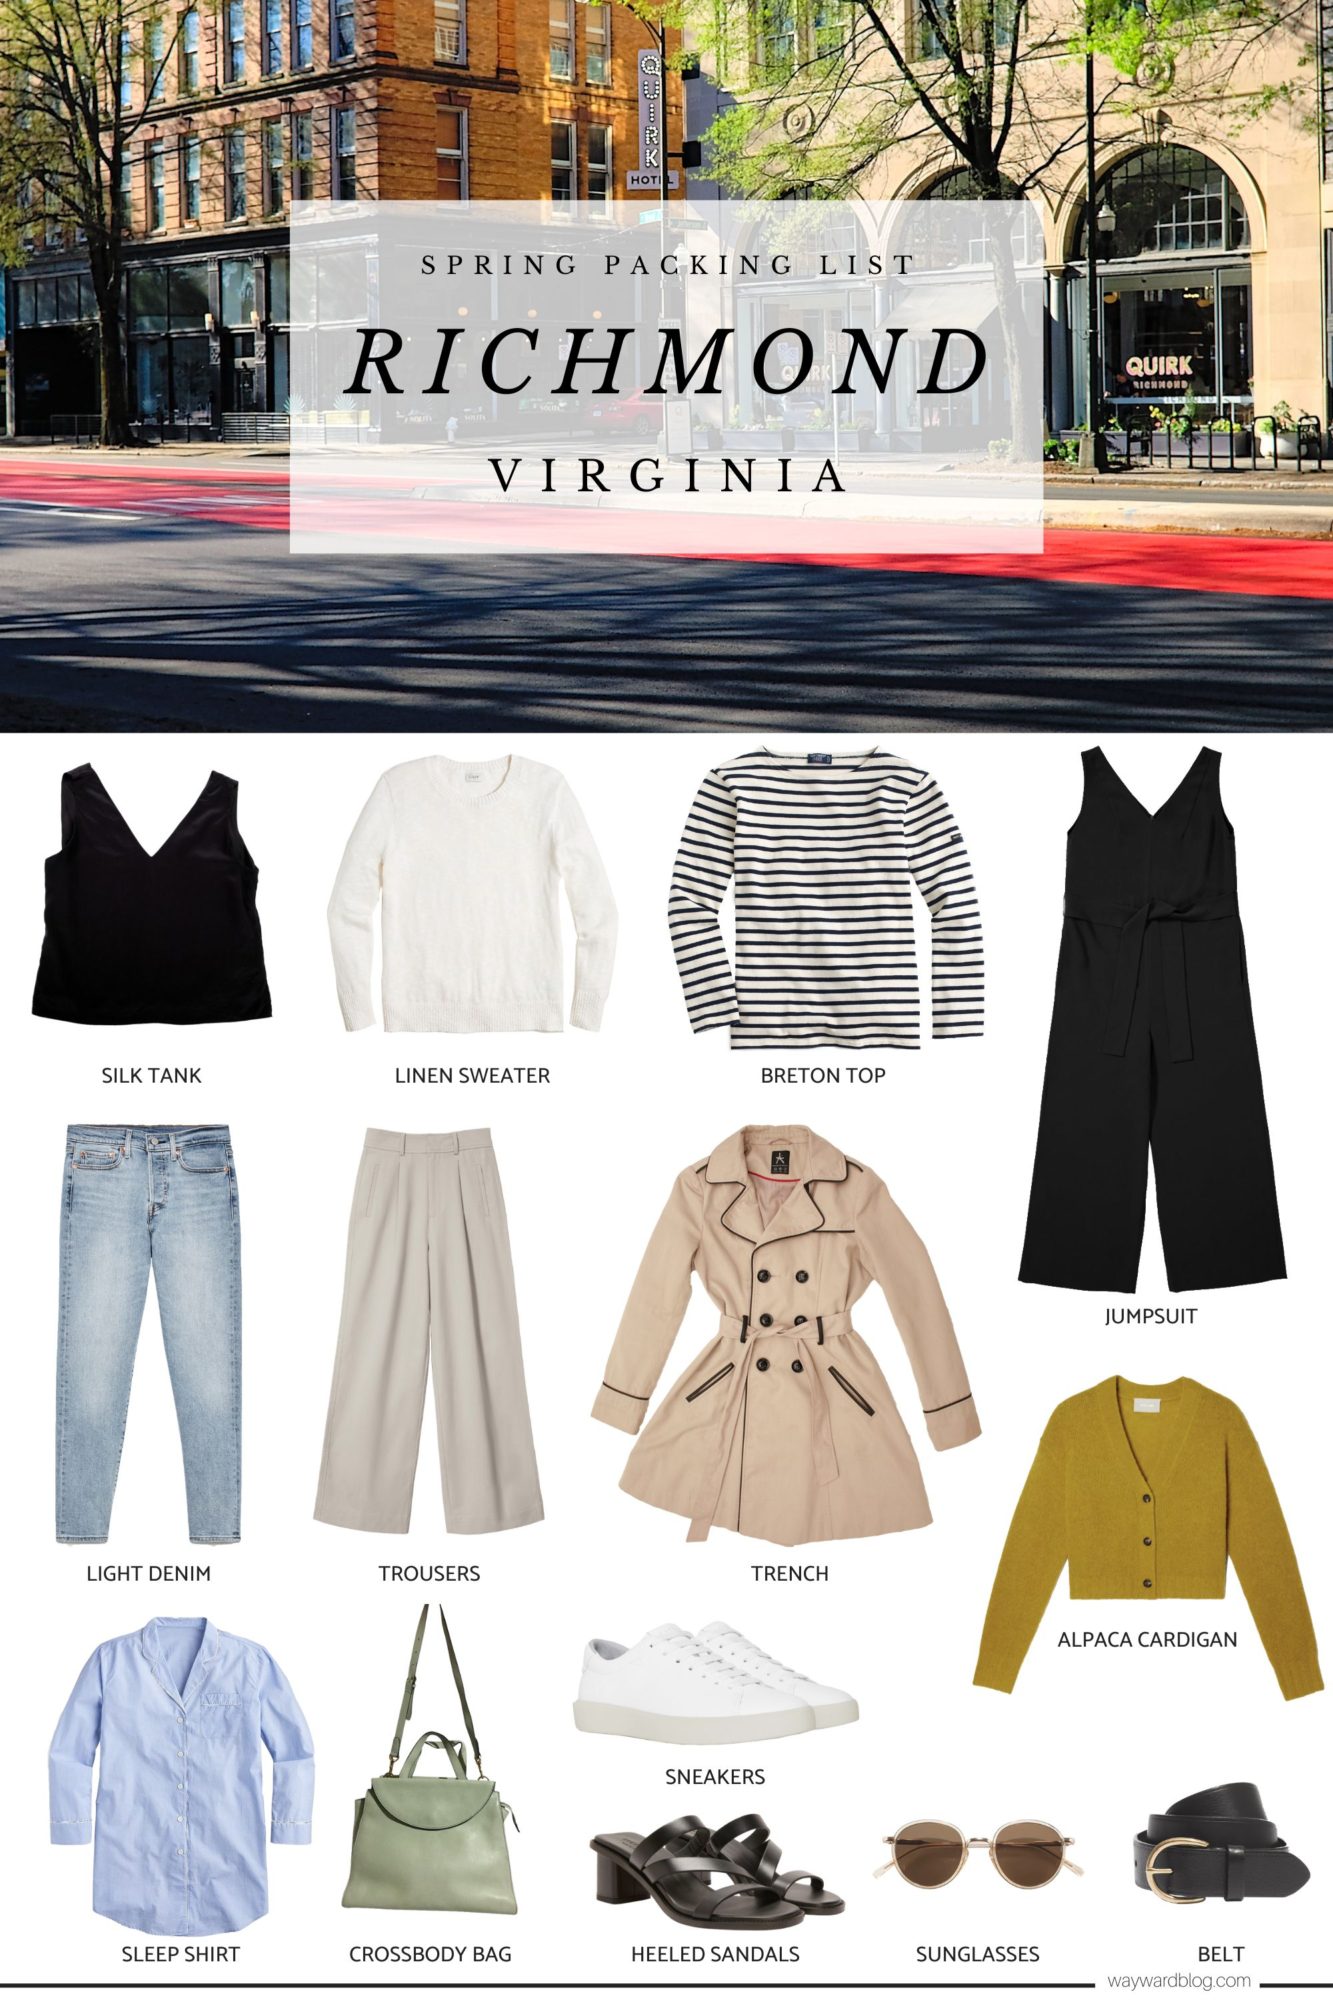 A collage of all items in the Richmond packing list